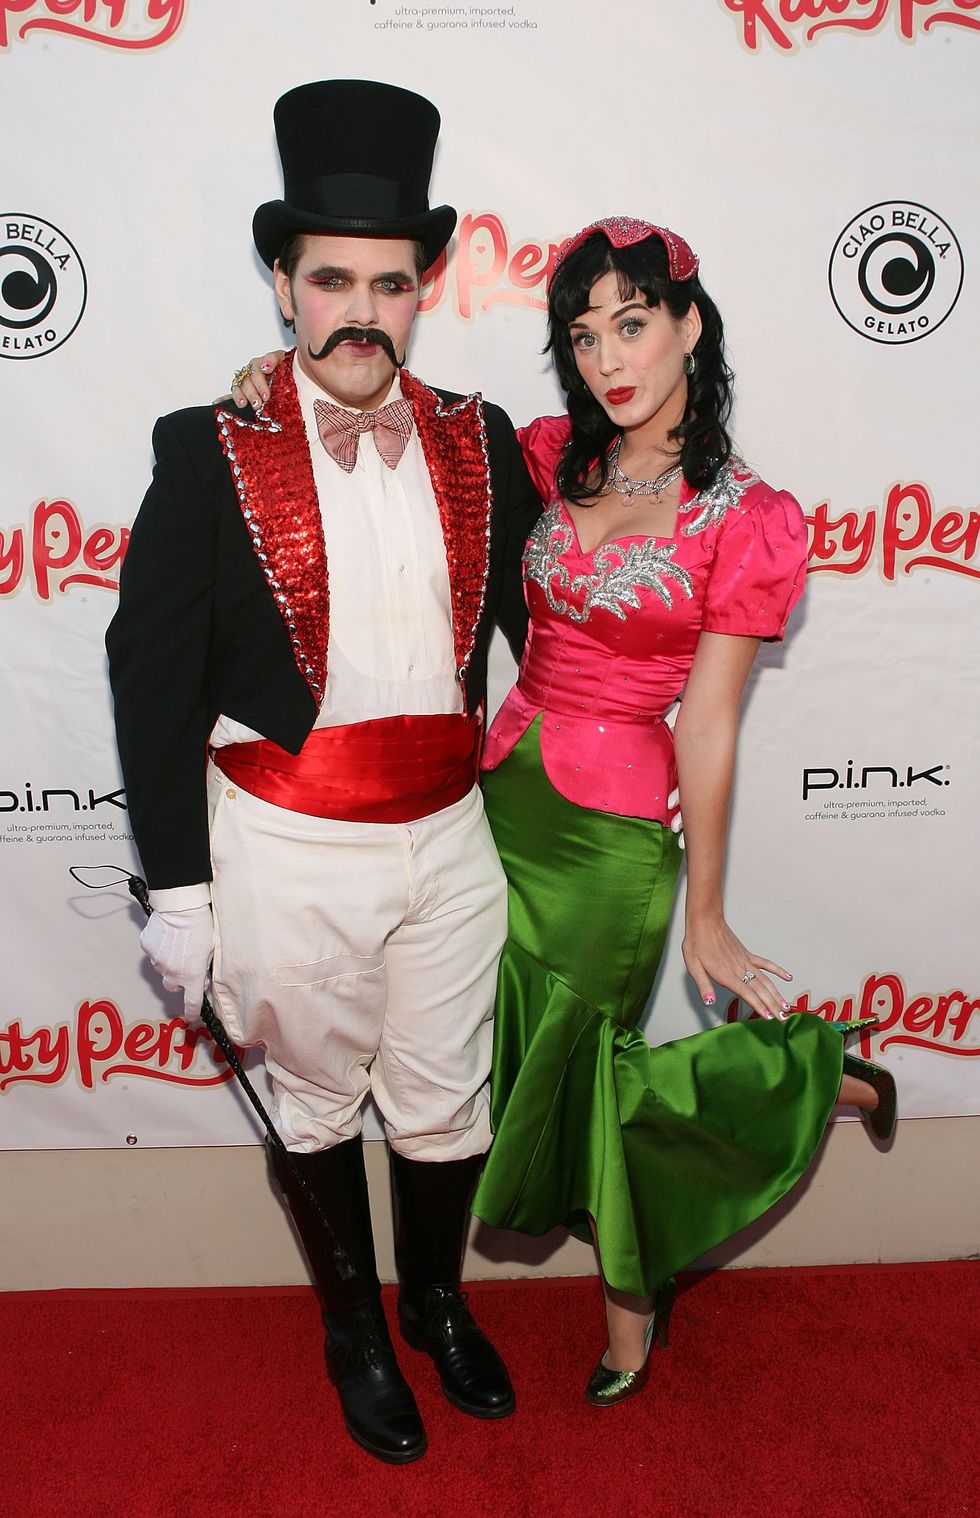 katy perry record release party for "one of the boys"